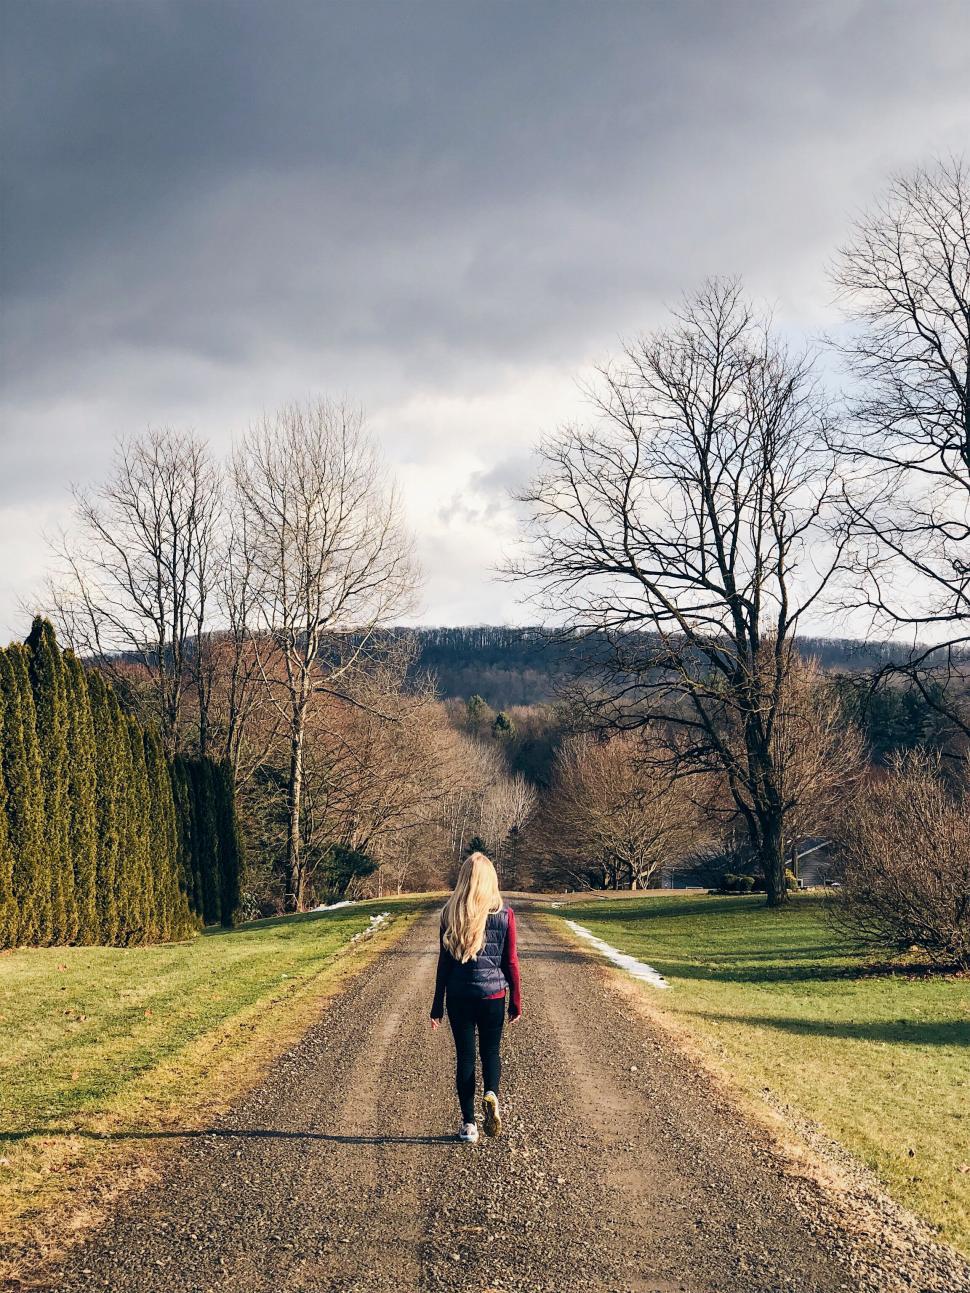 Free Image of Woman walking on a country road in autumn 